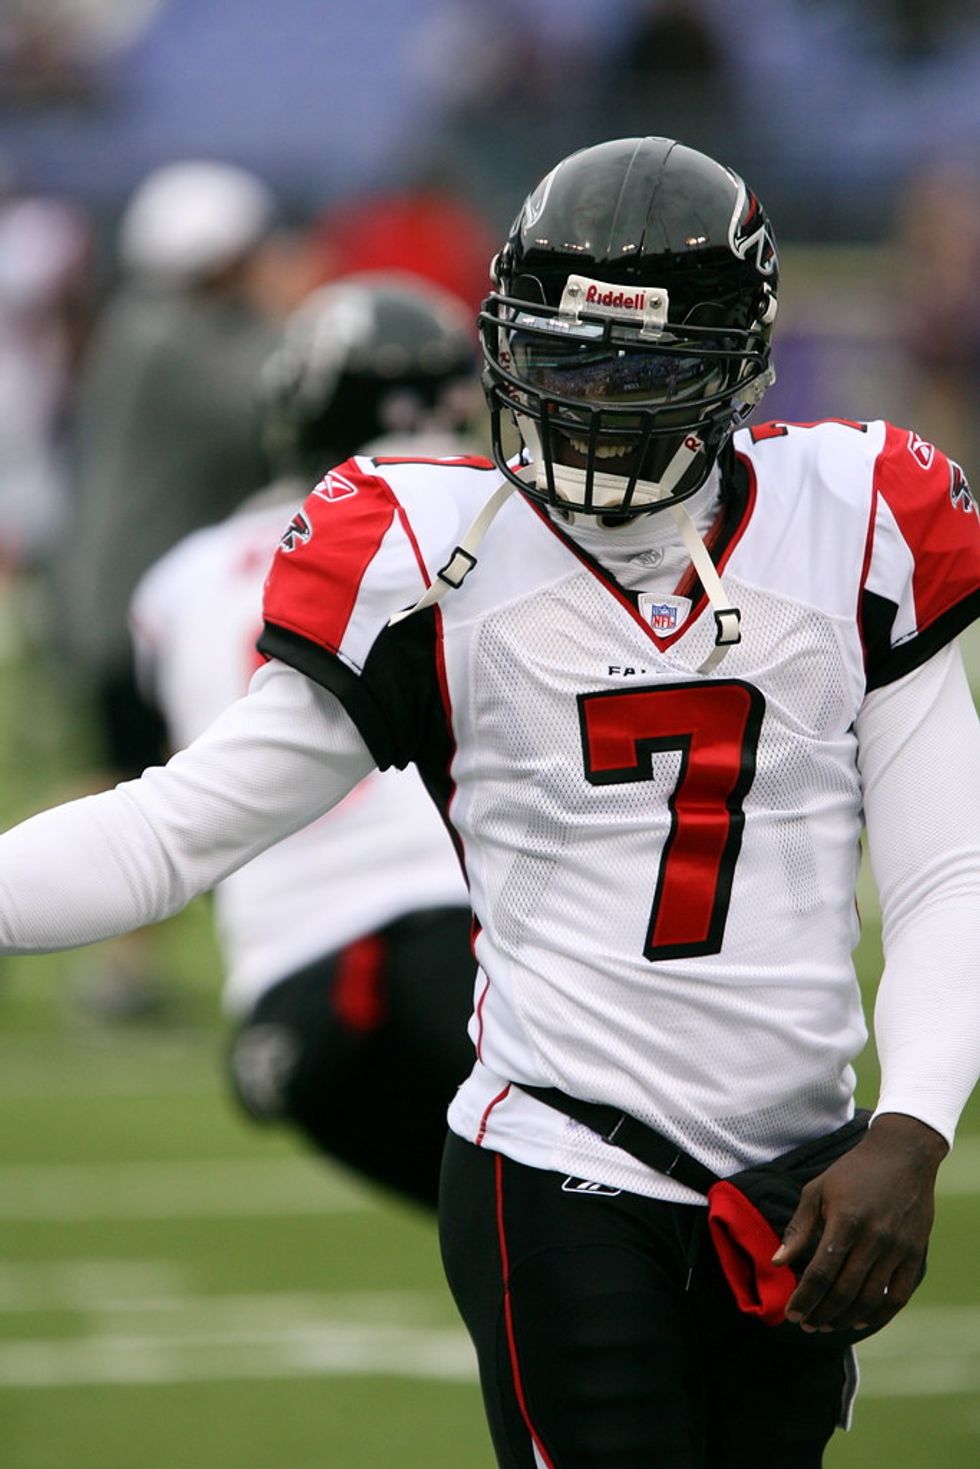 Why People Need To Back Off Michael Vick